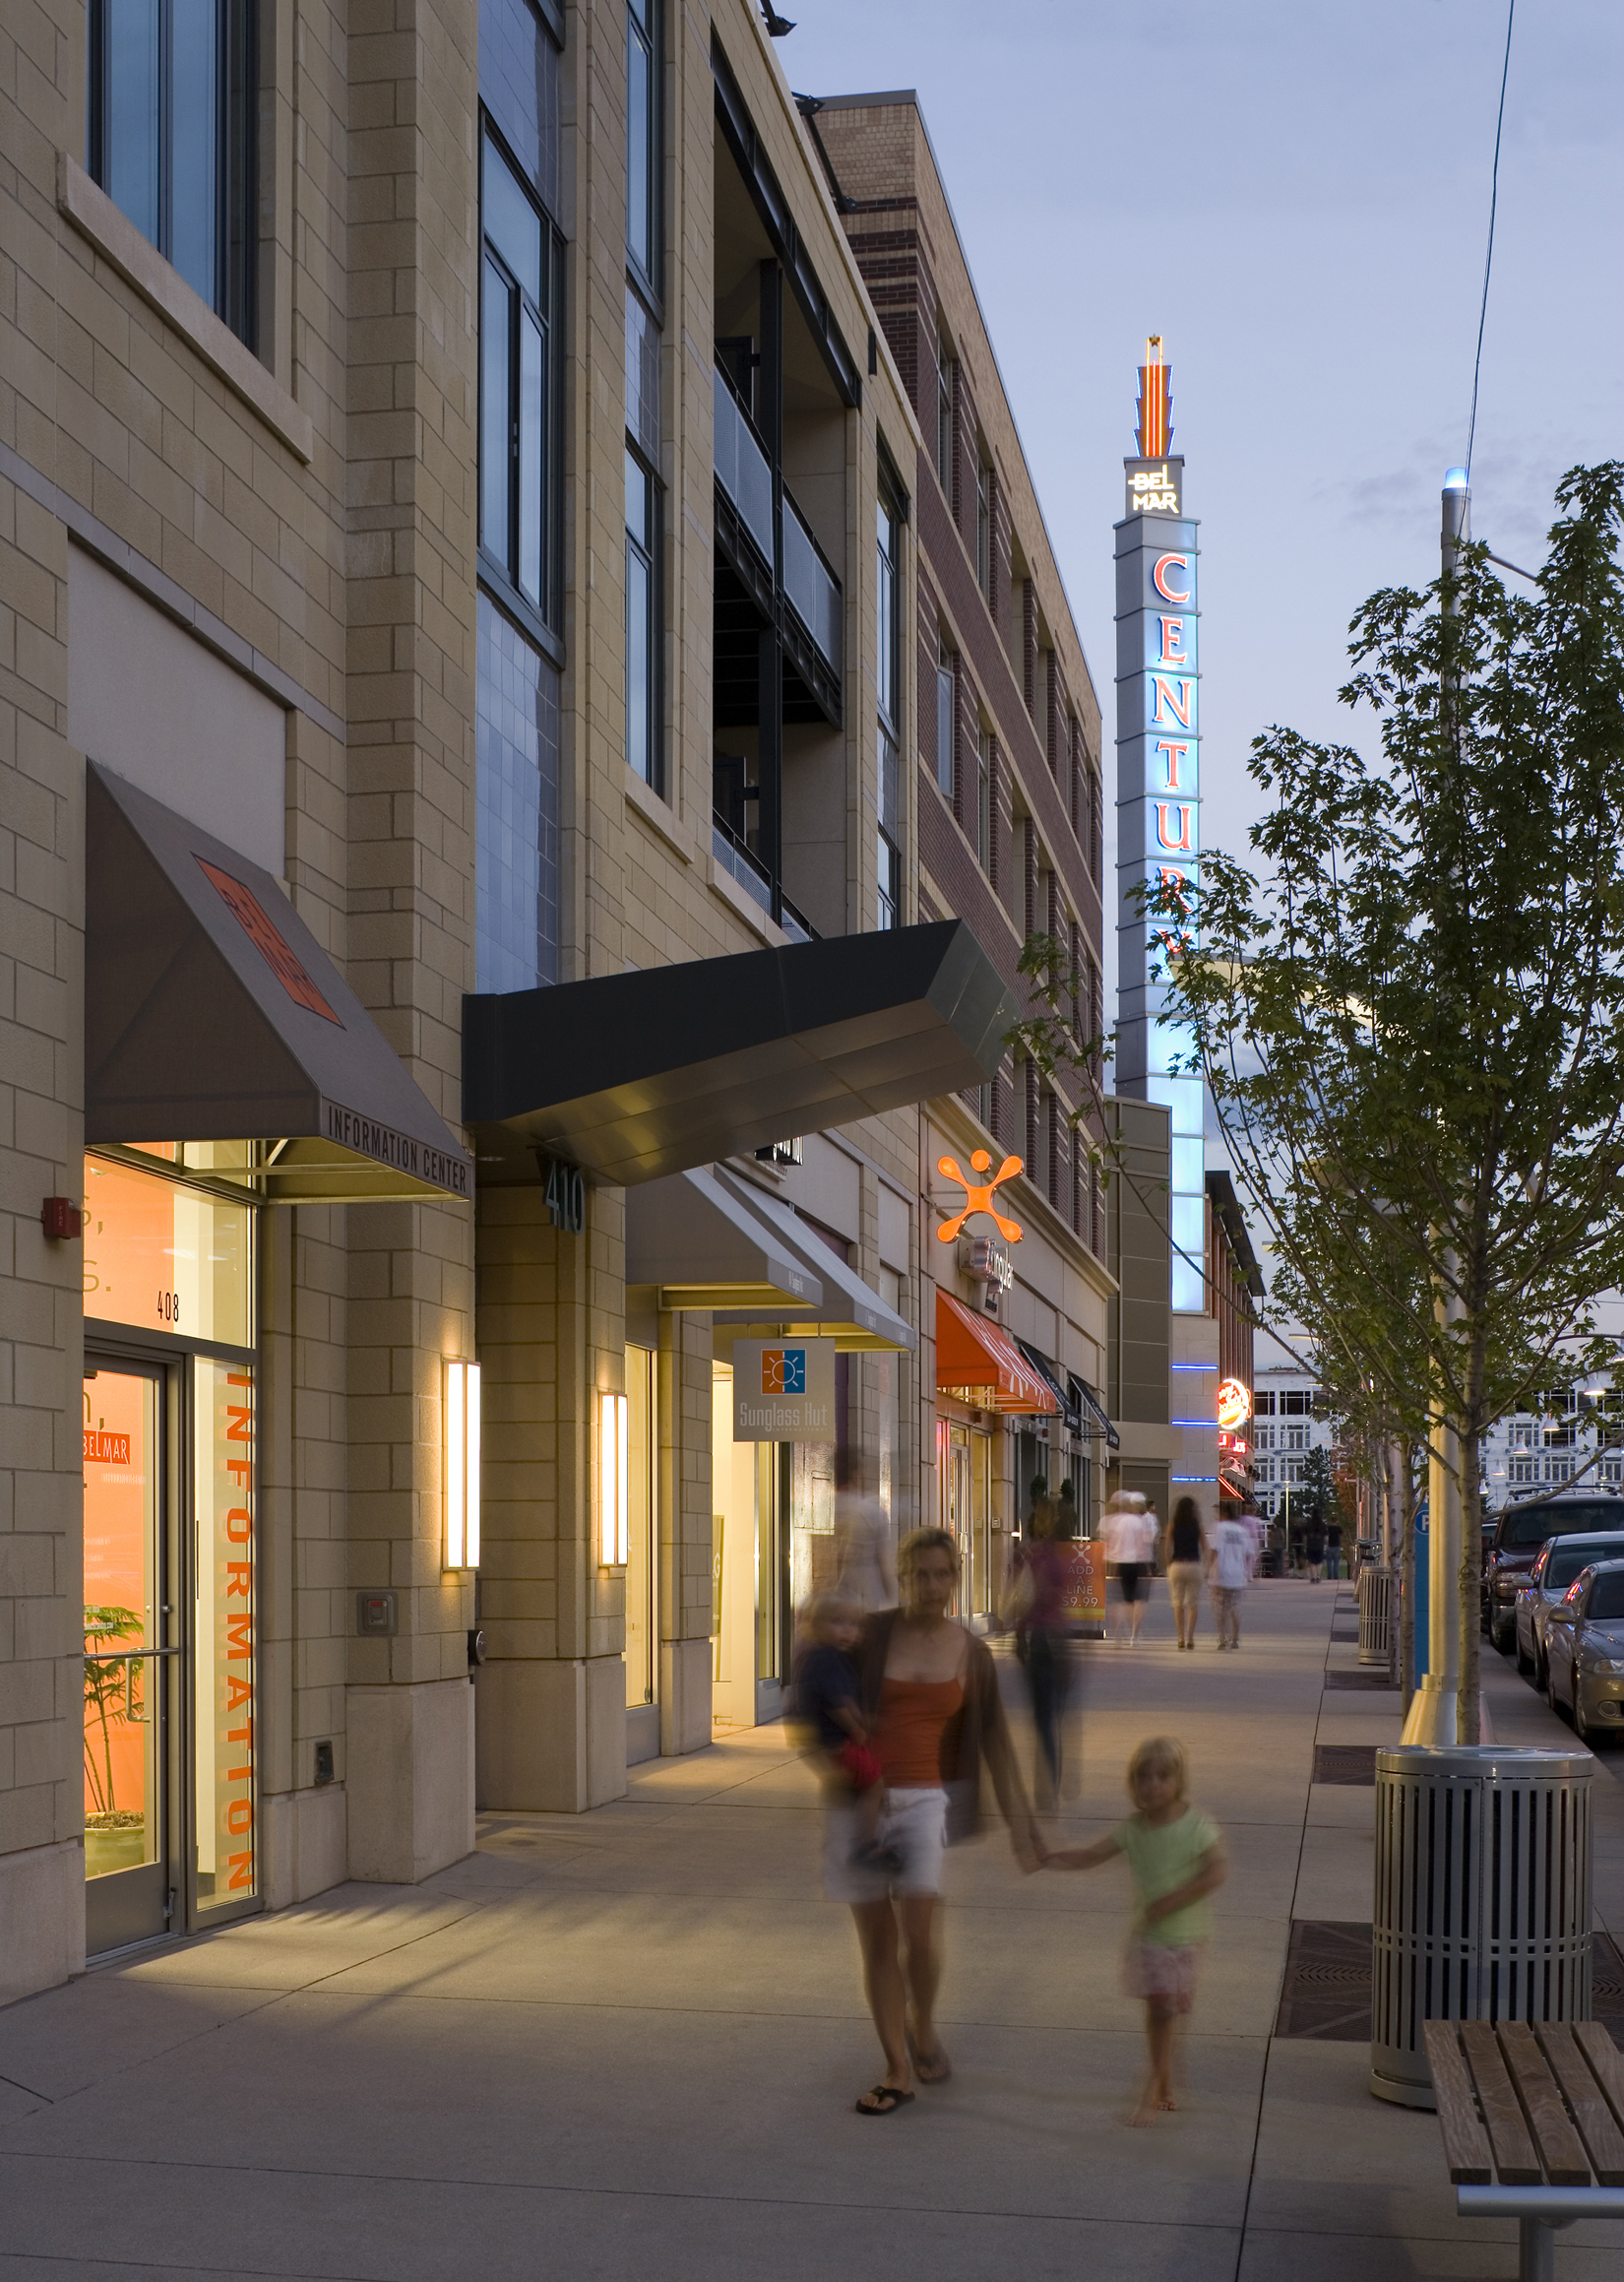 Founded with the core purpose of “creating healthier cities,” Civitas recently won an International Making Cities Livable Award for Belmar Town Center as a “Healthy 10-minute Neighborhood.”